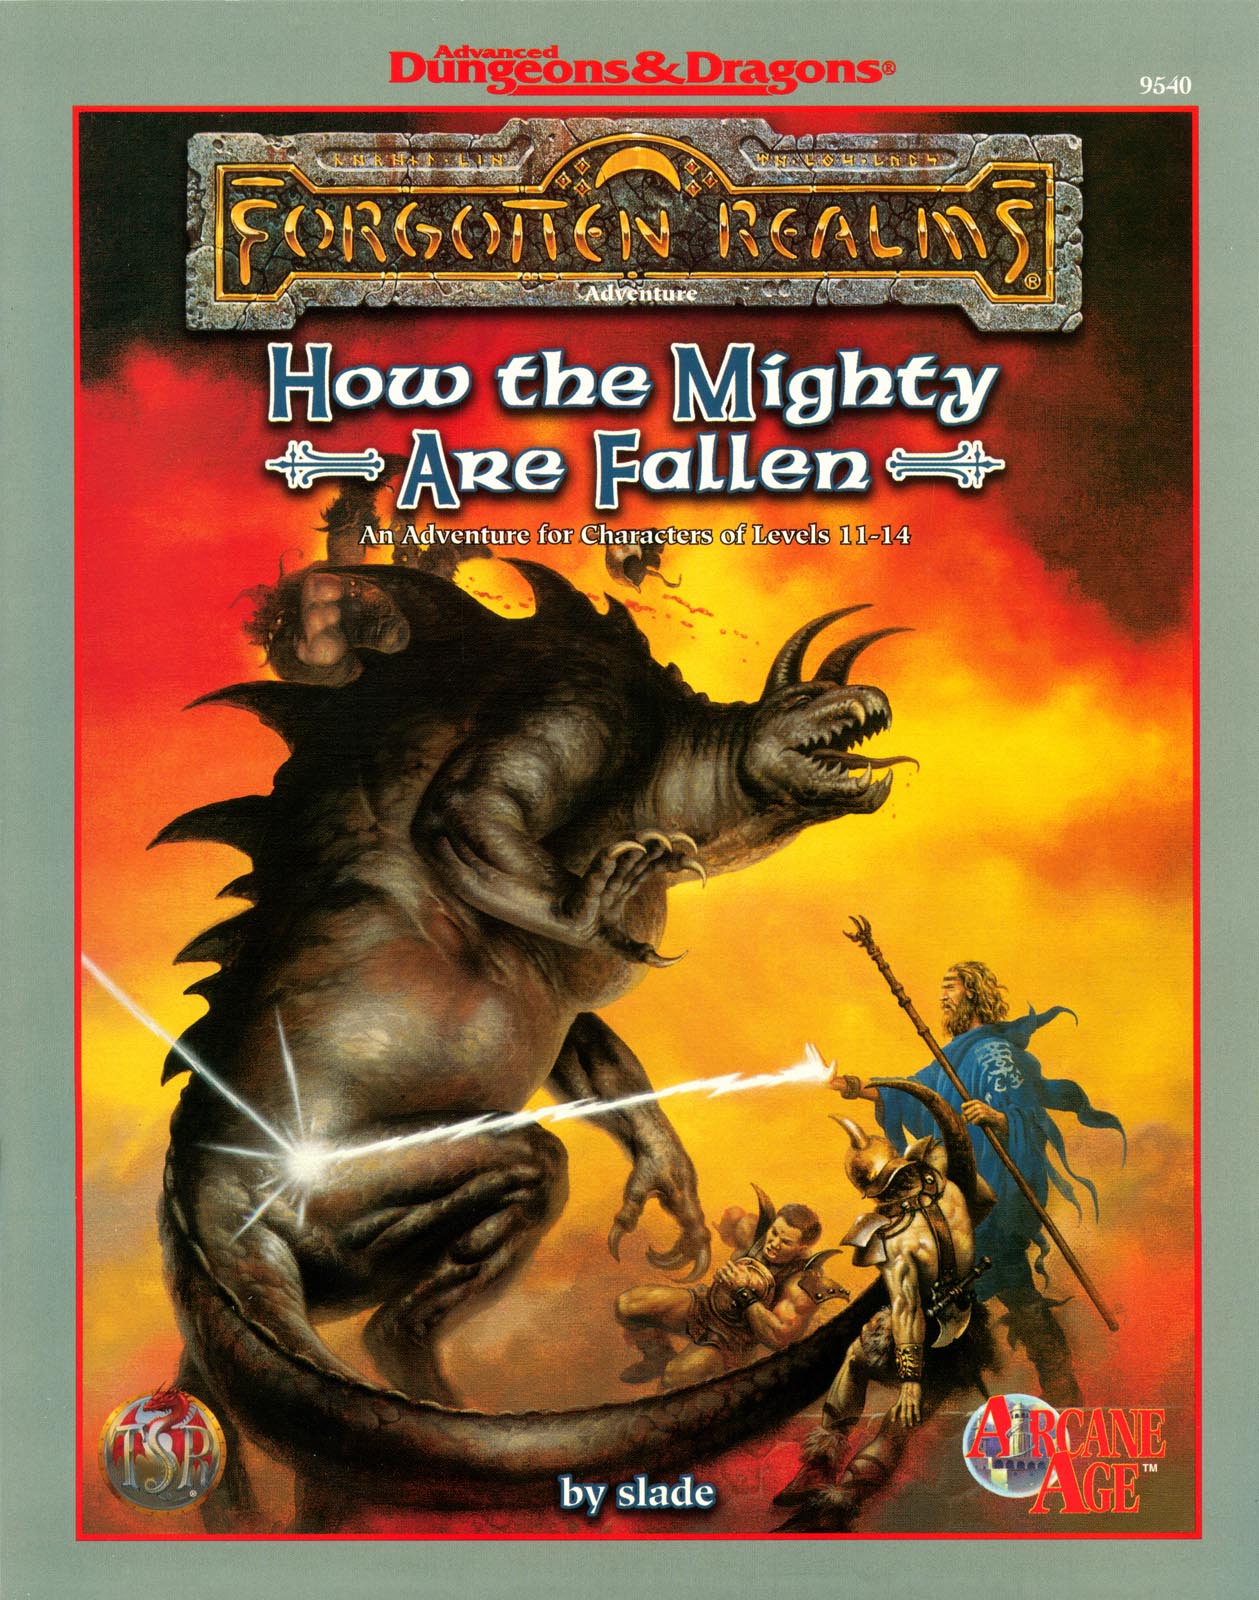 How the Mighty Are FallenCover art